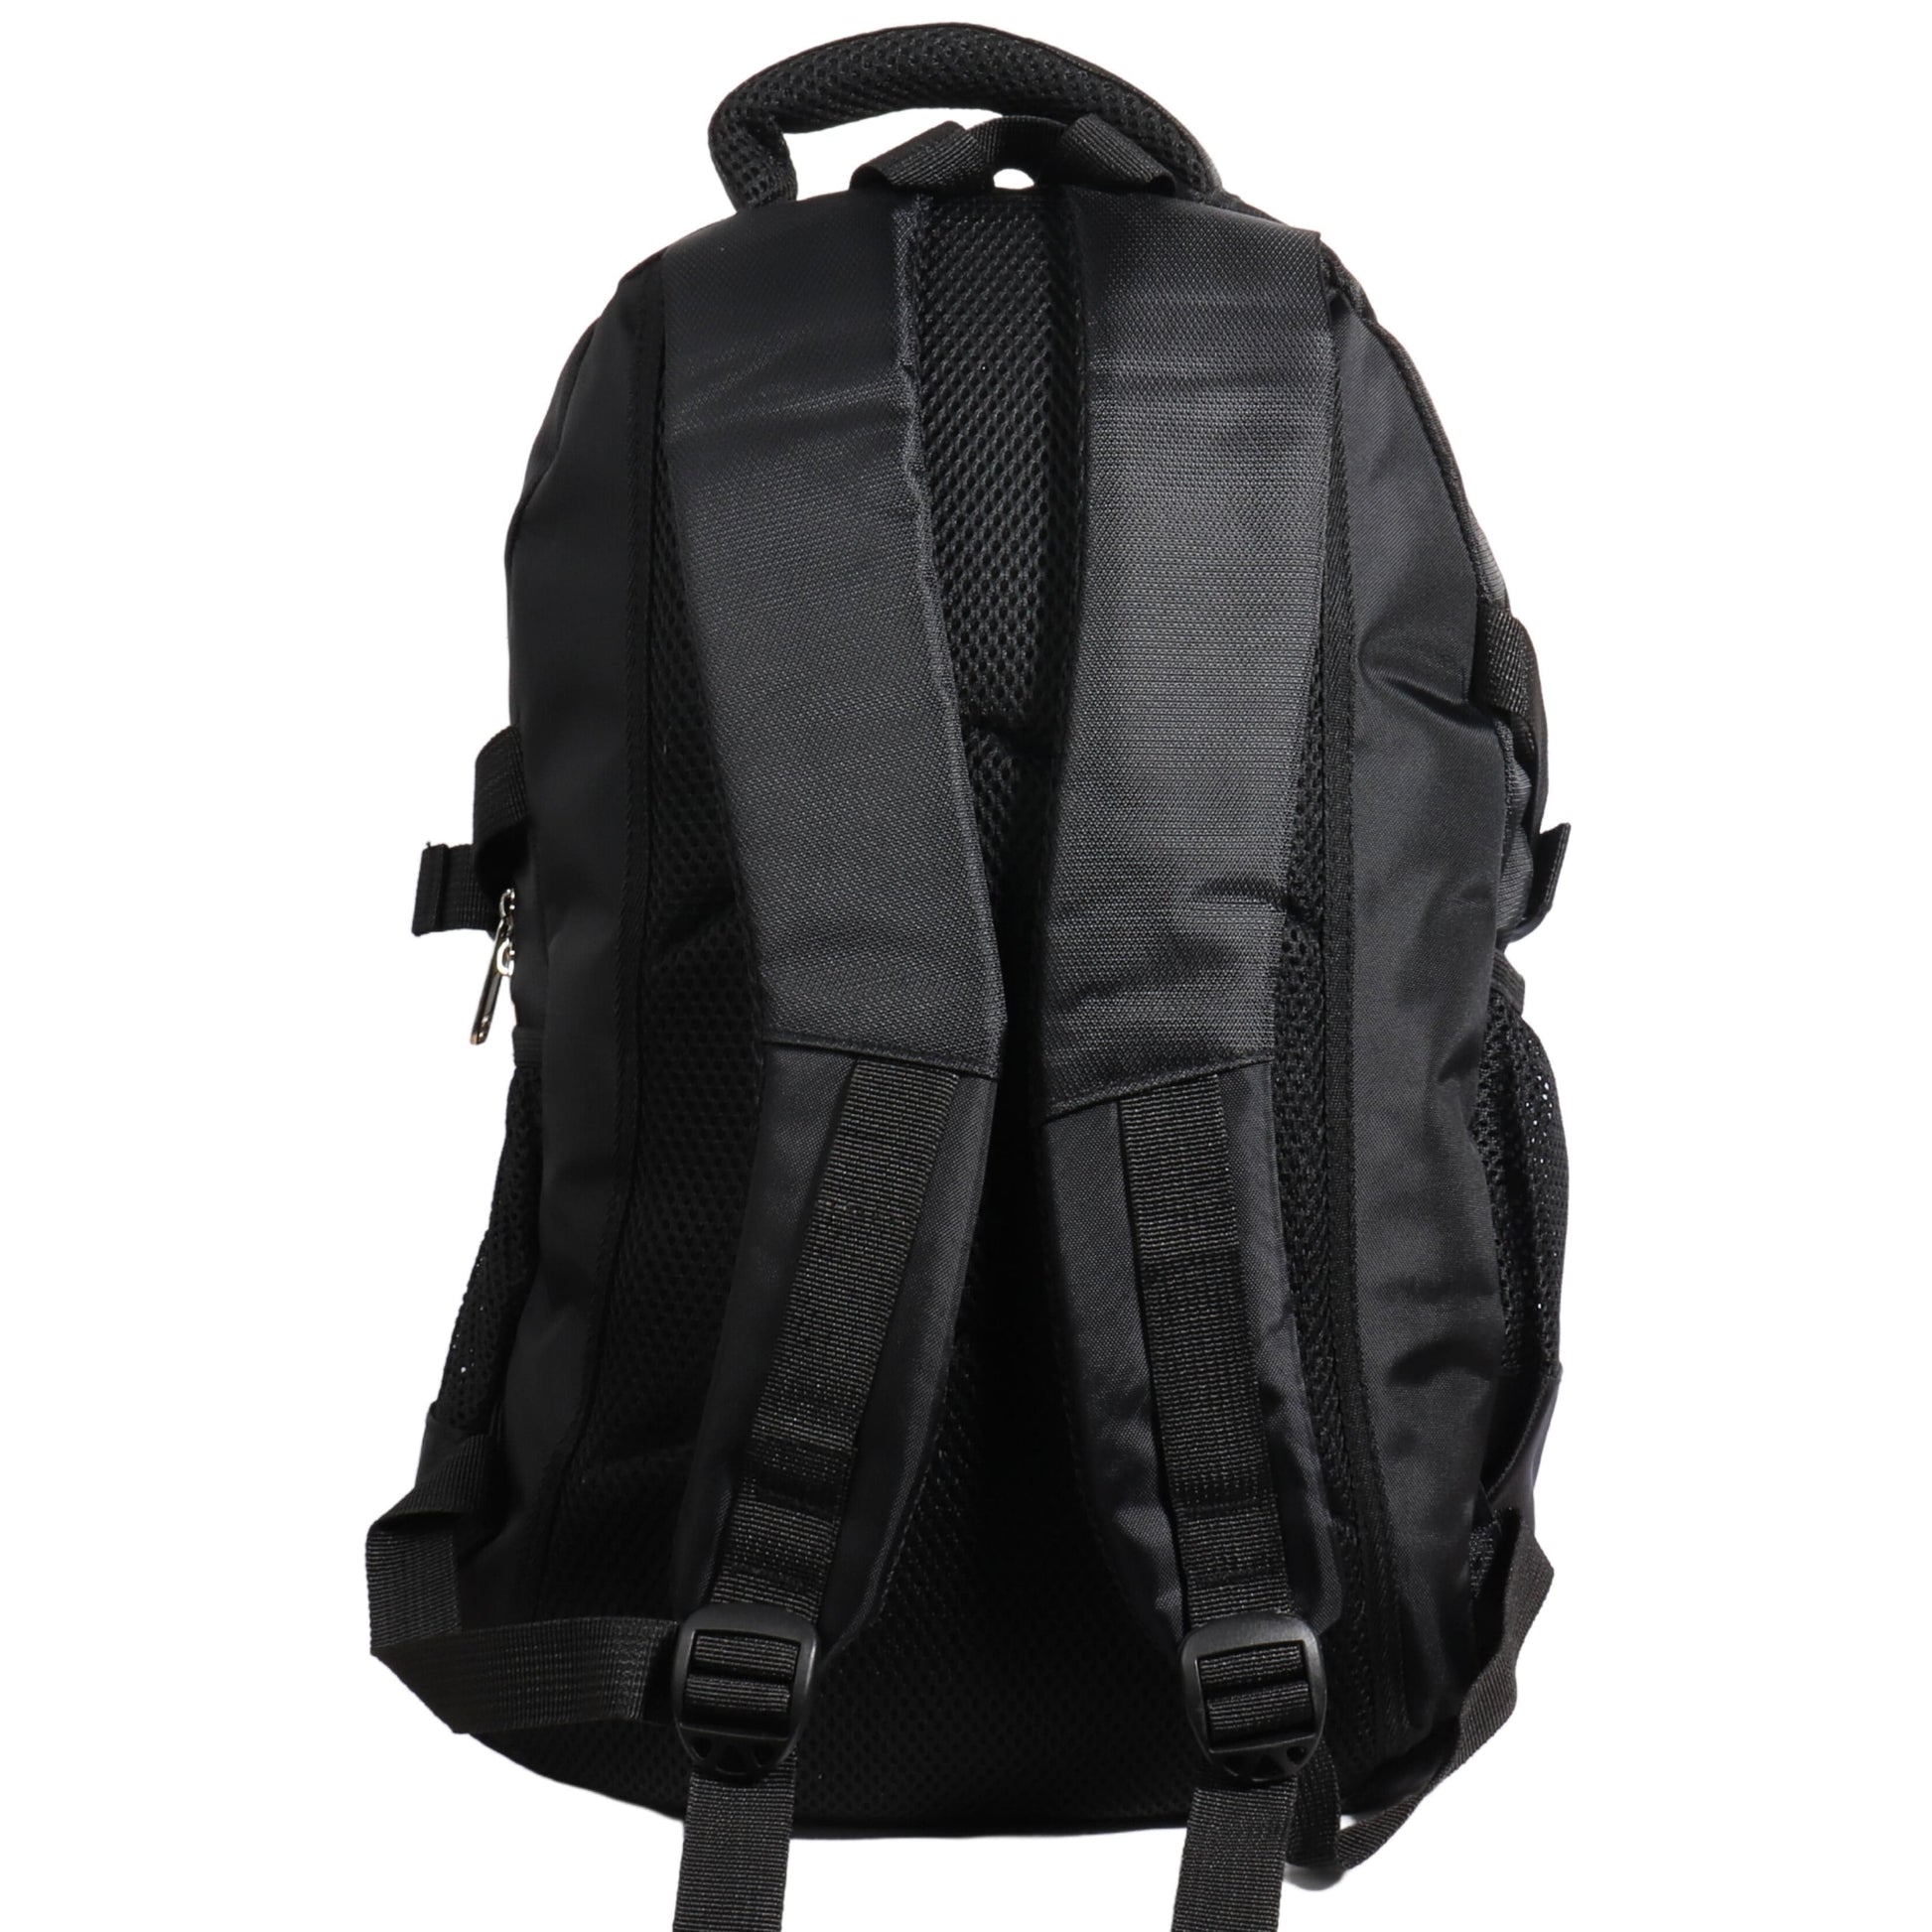 Beyond Marketplace School Bags Black Multiple Compartments Backpack